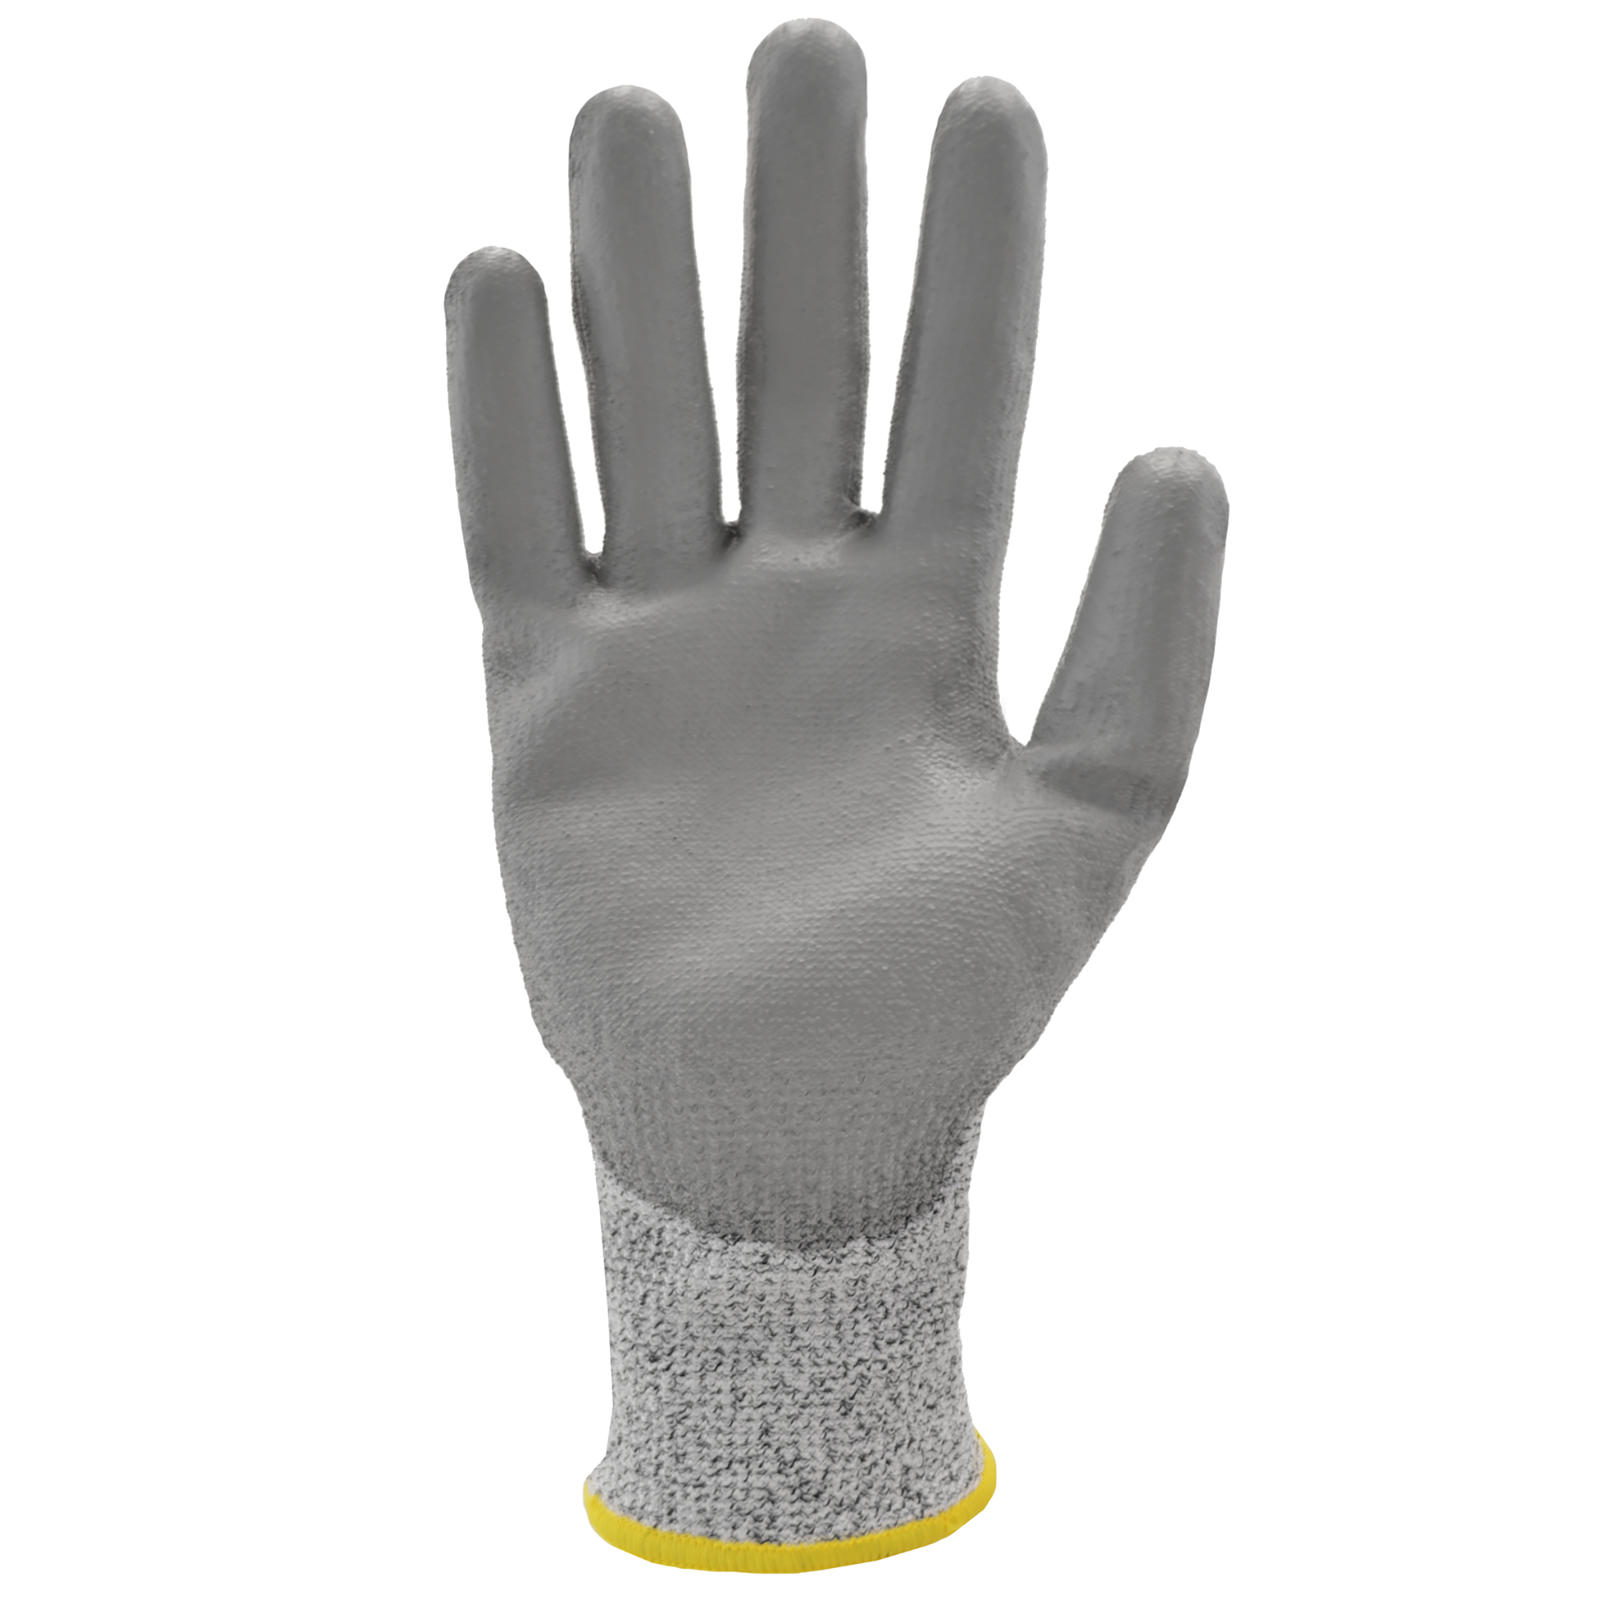 The palm of a Cut resistant JORESTECH gray safety work gloves with polyurethane dipped palm